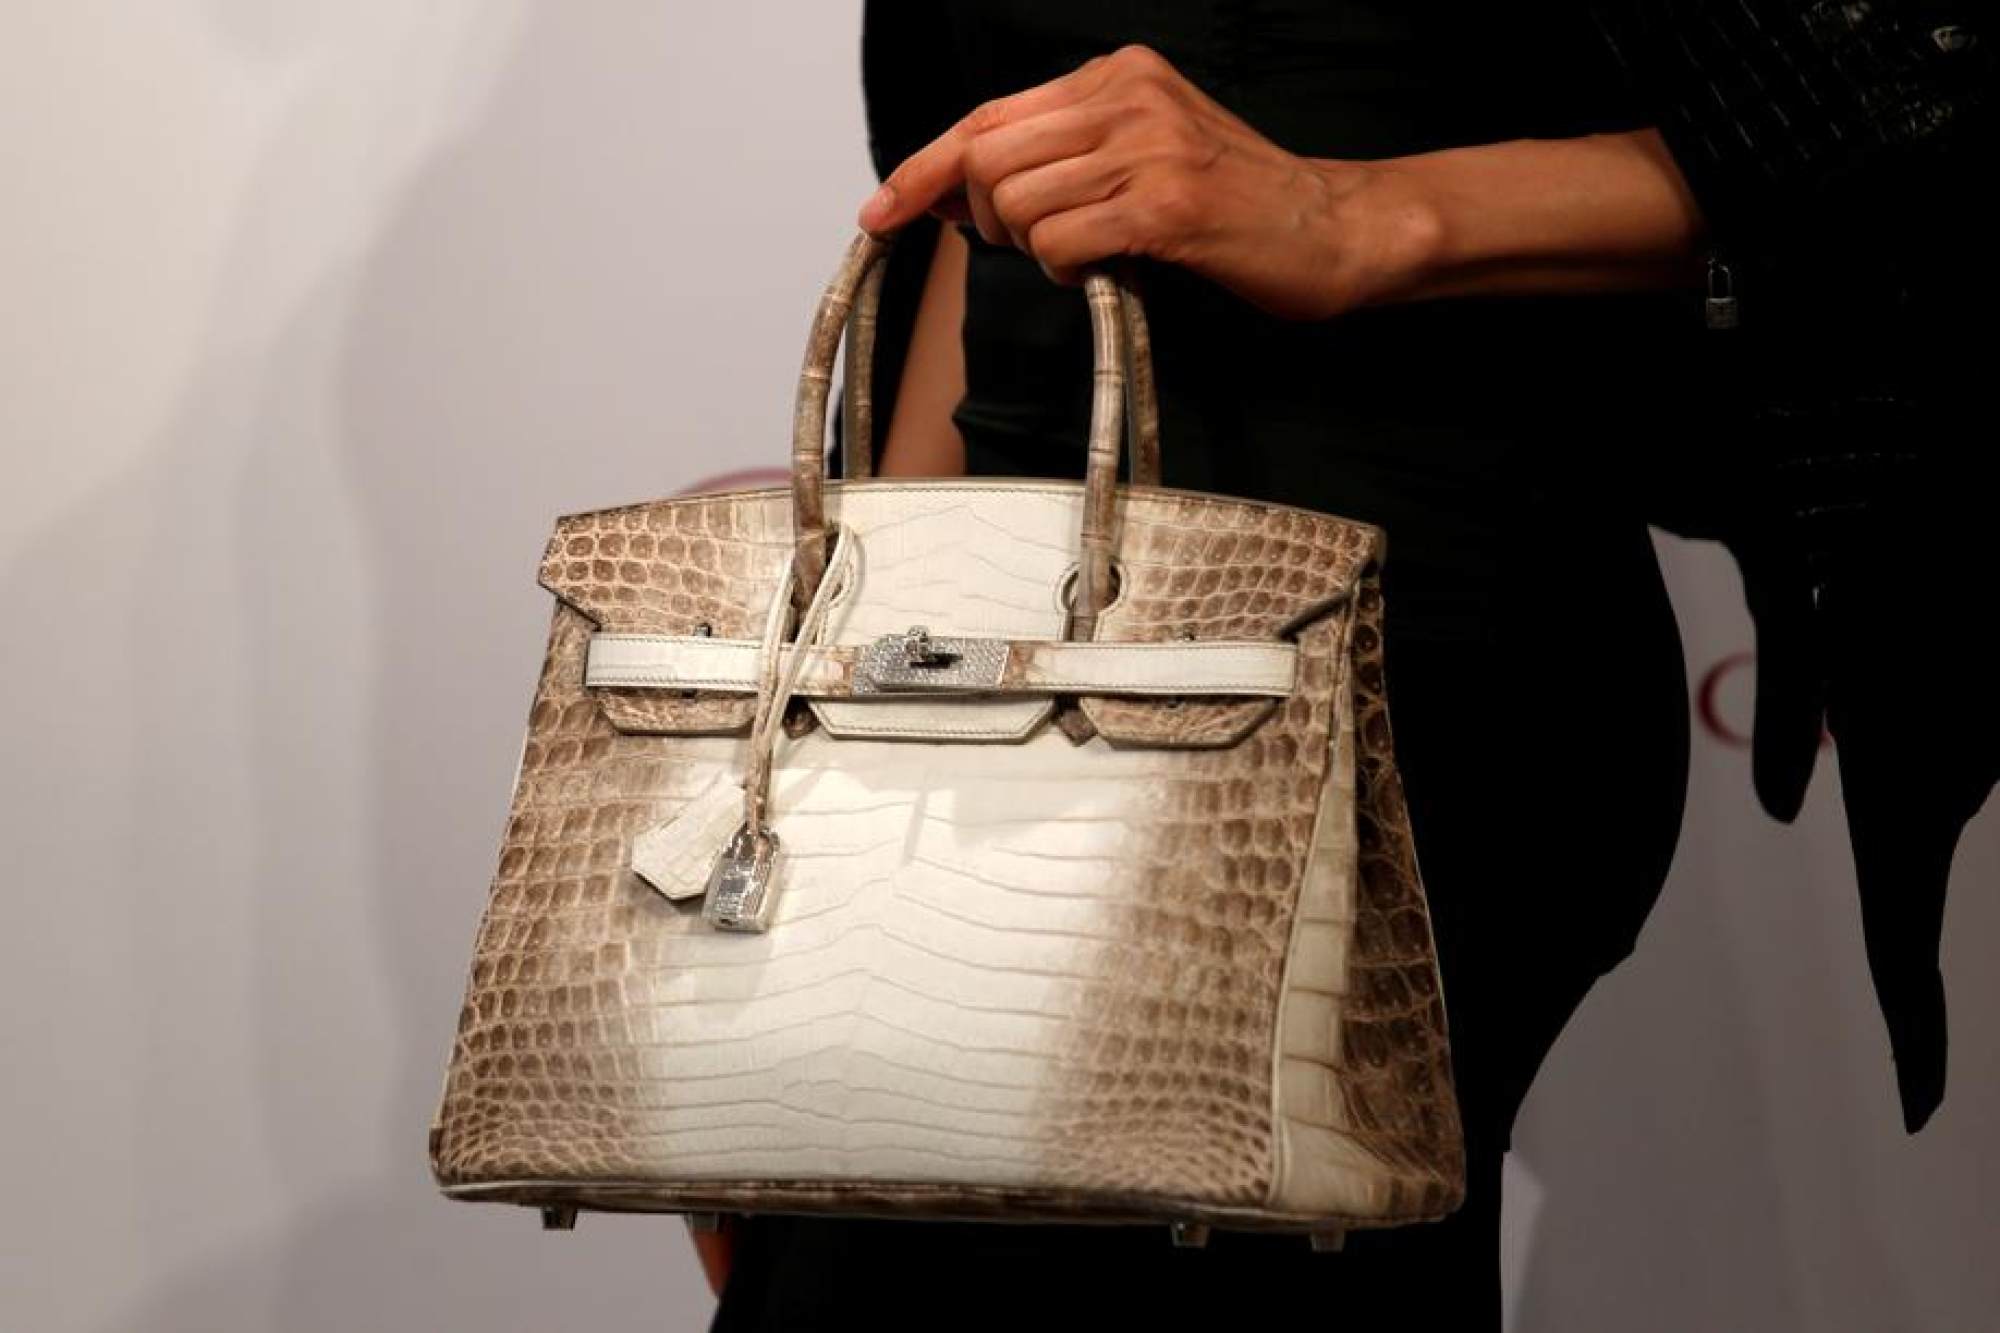 A Chanel bag as expensive as an Hermès Birkin? Chanel's price hikes are an  attempt to make them as exclusive and hard to buy as rival's iconic handbags,  say experts